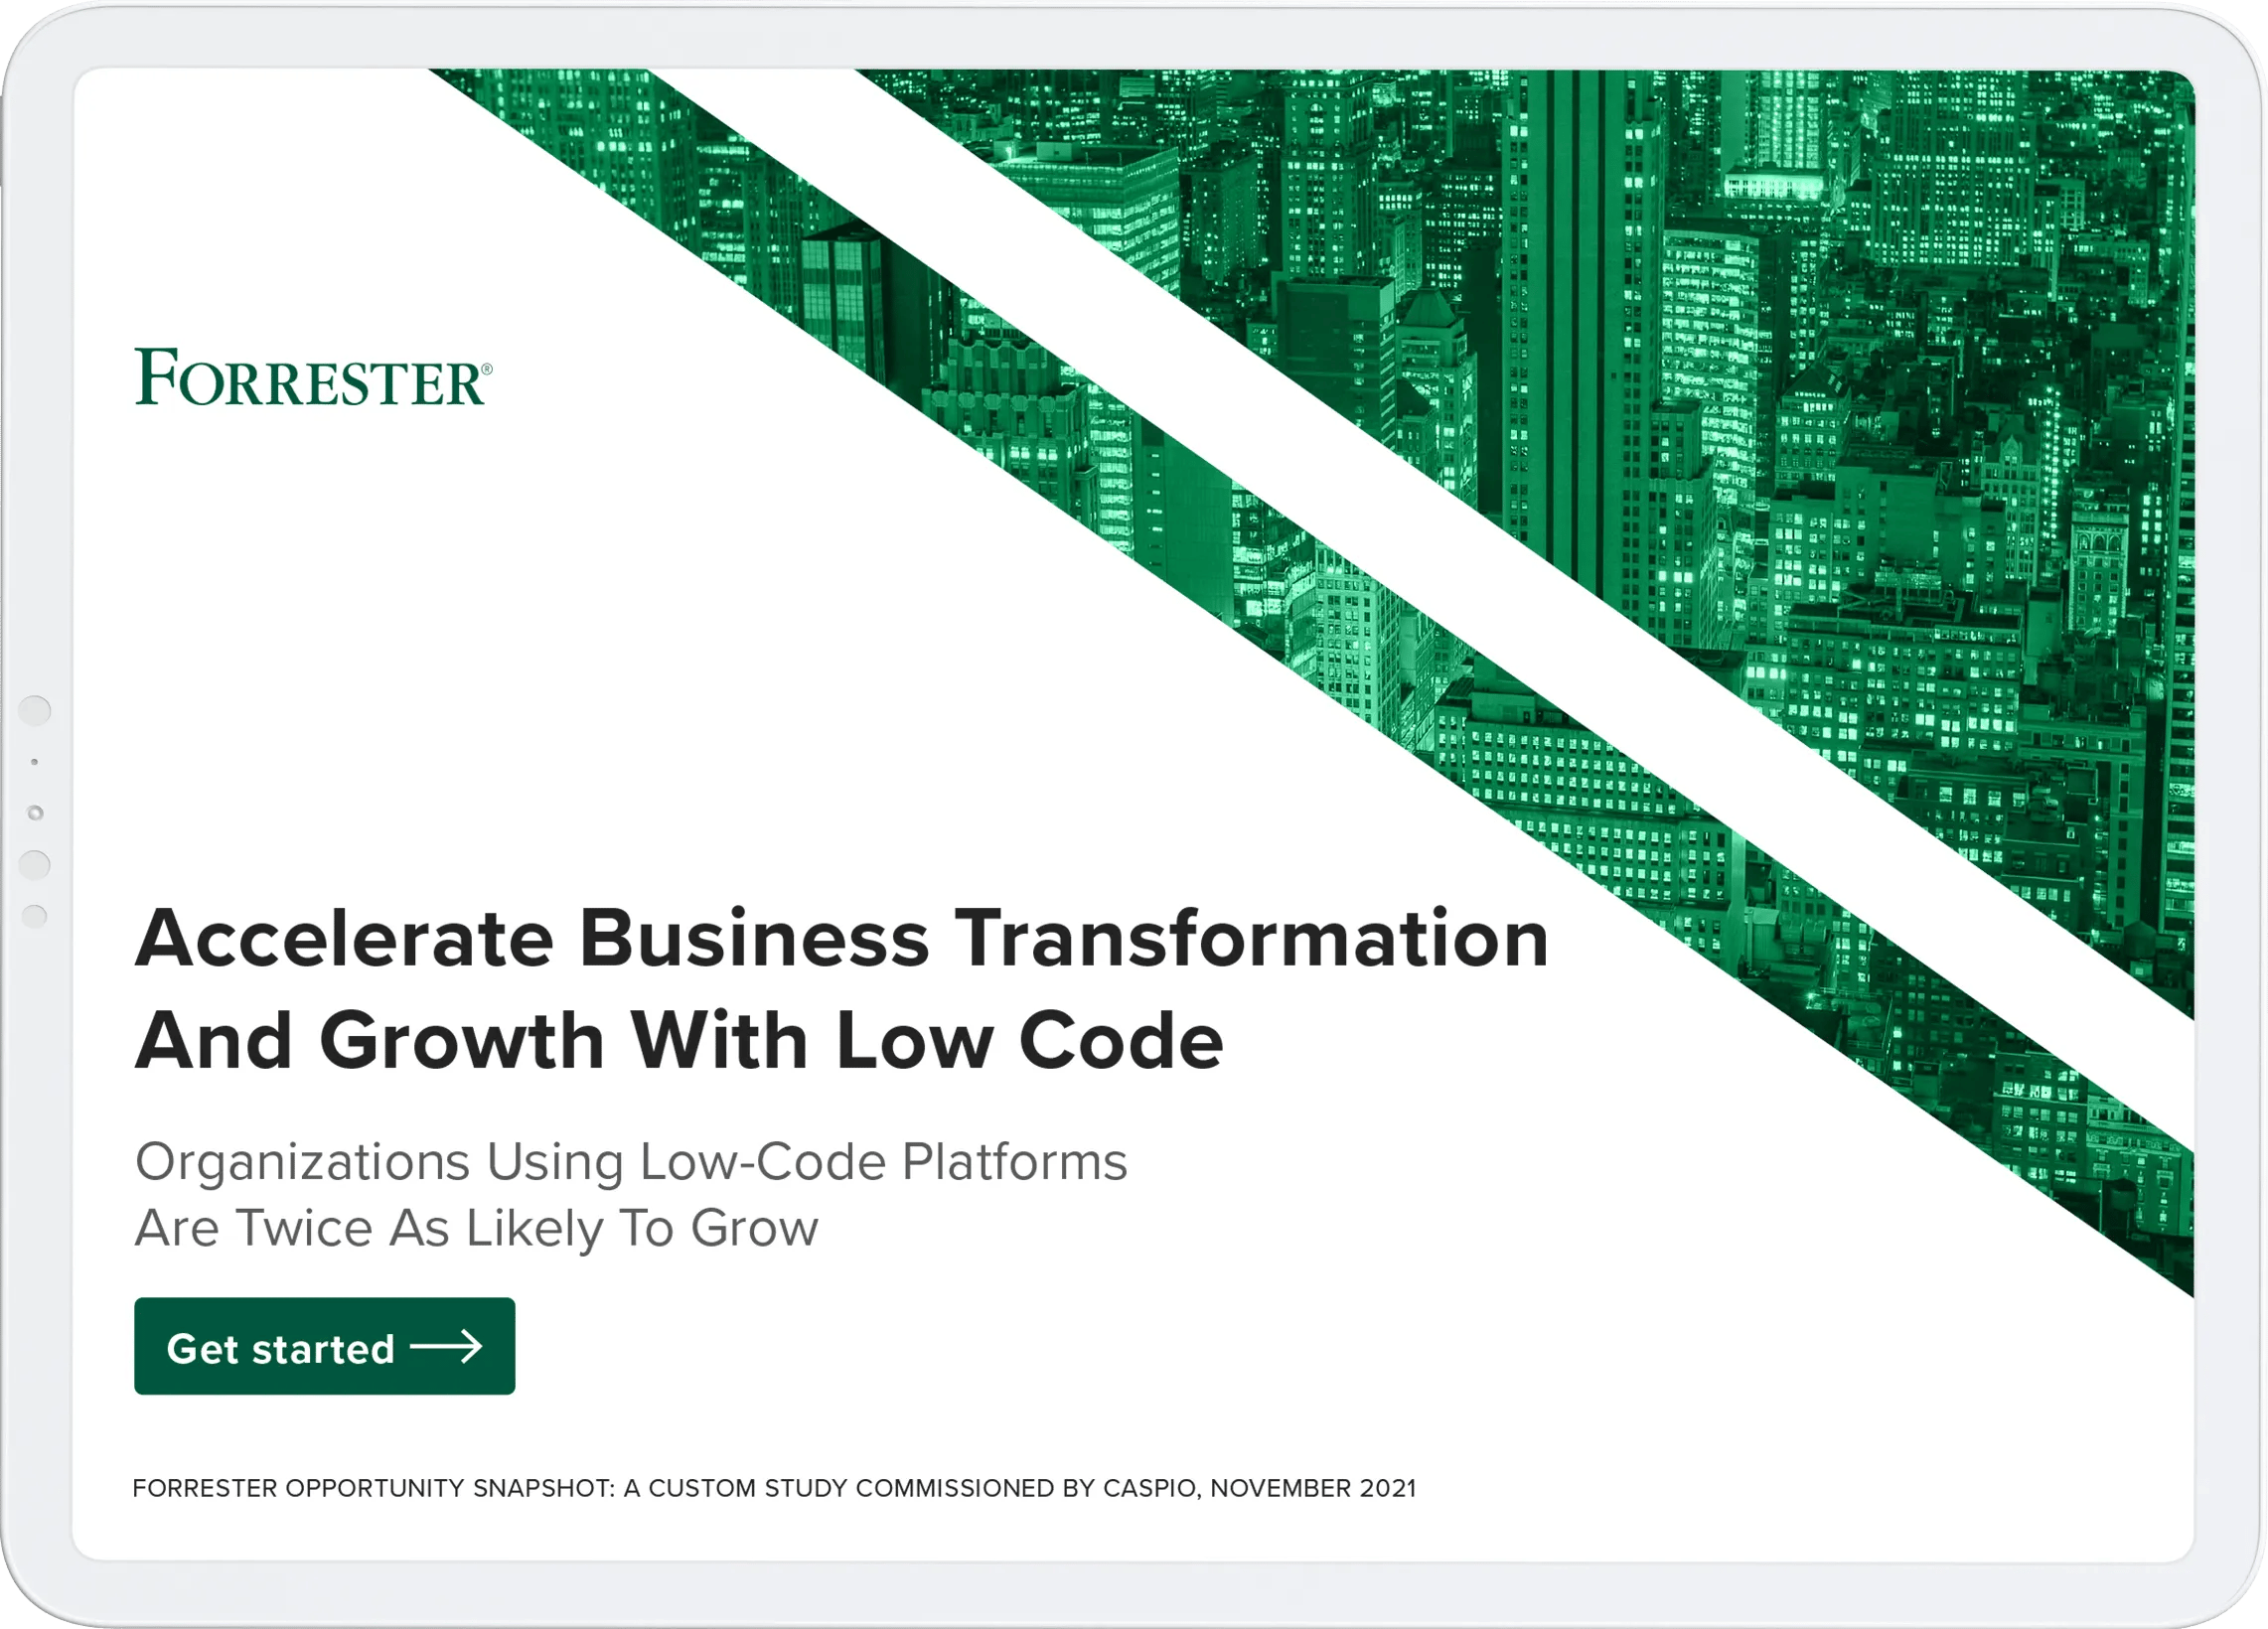 Accelerate Business Transformation and Growth With Low Code